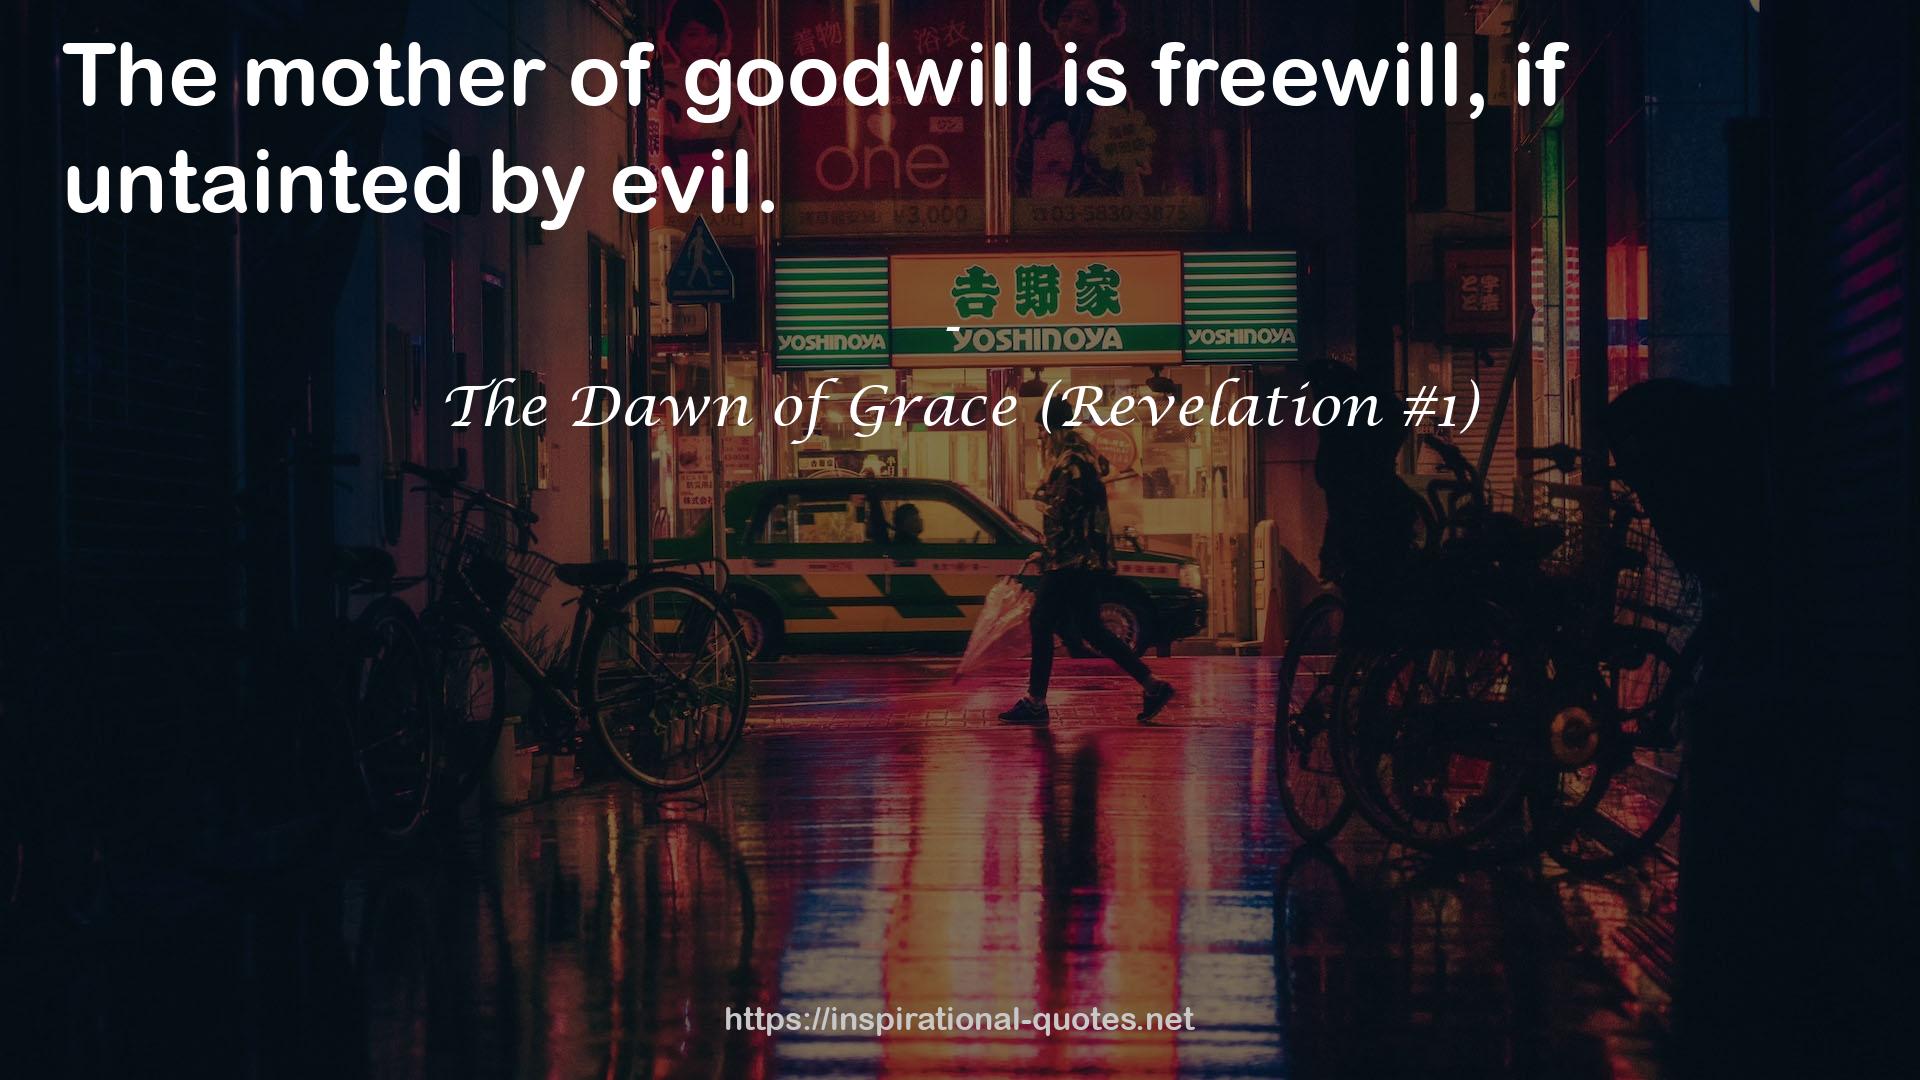 The Dawn of Grace (Revelation #1) QUOTES